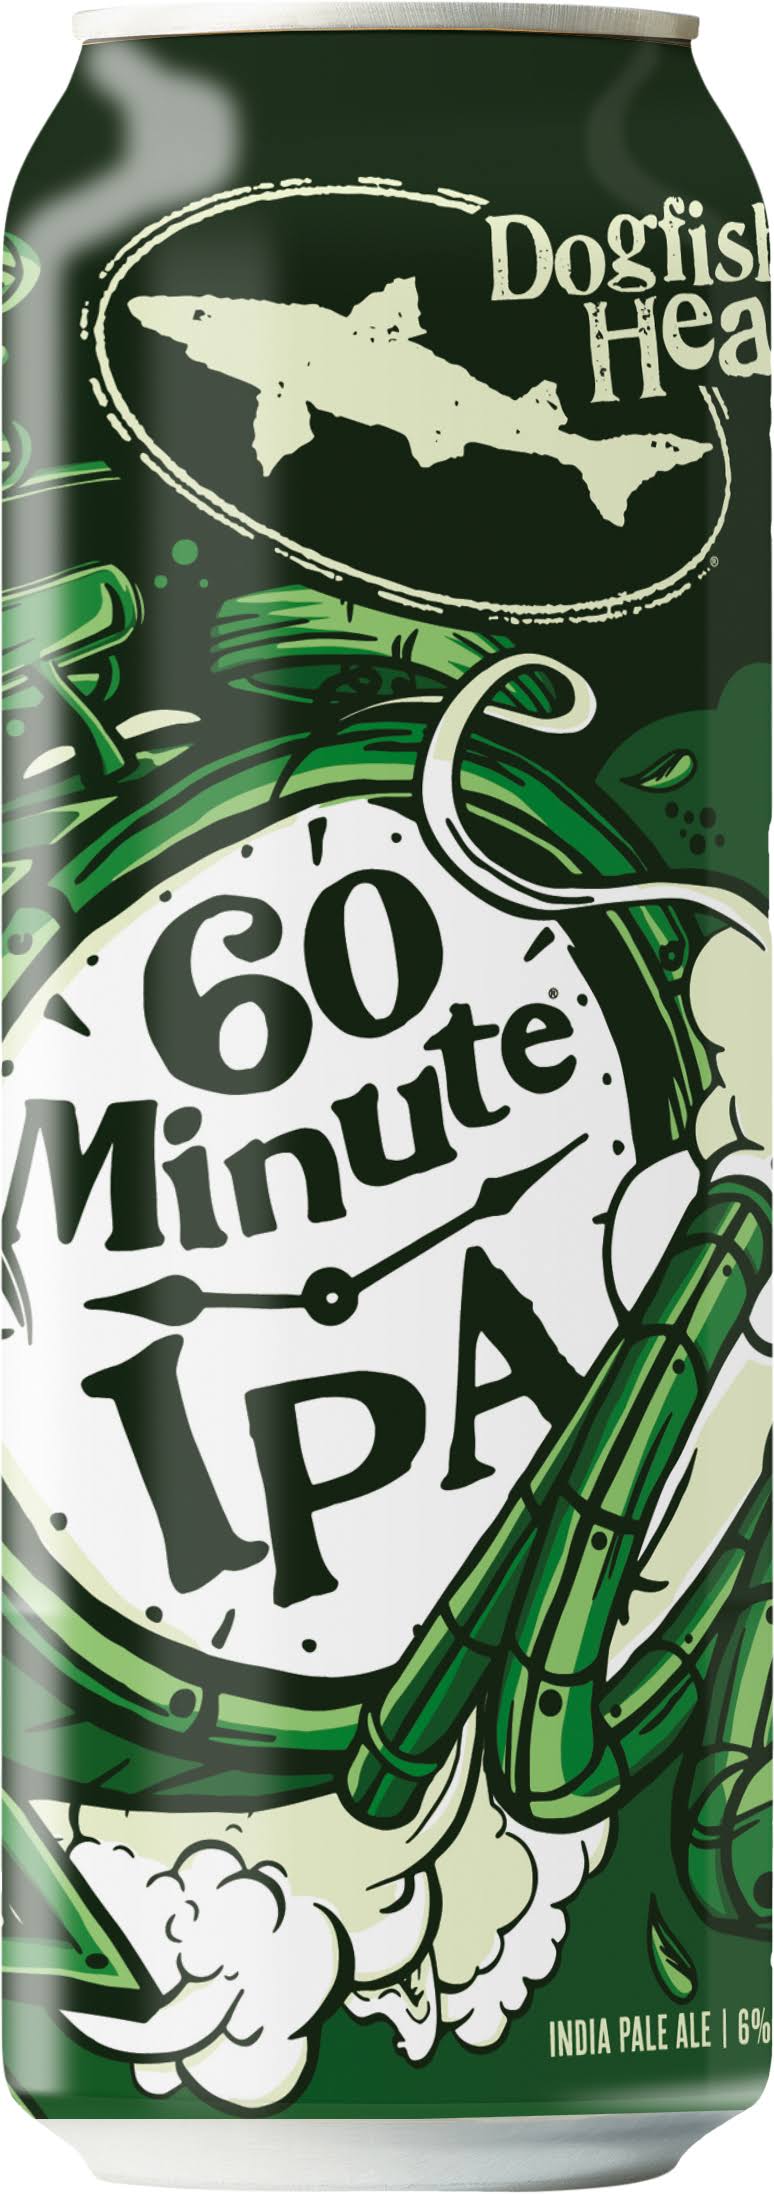 Dogfish Head Beer, India Pale Ale, 60 Minute IPA - 1 pint 3.25 fl oz